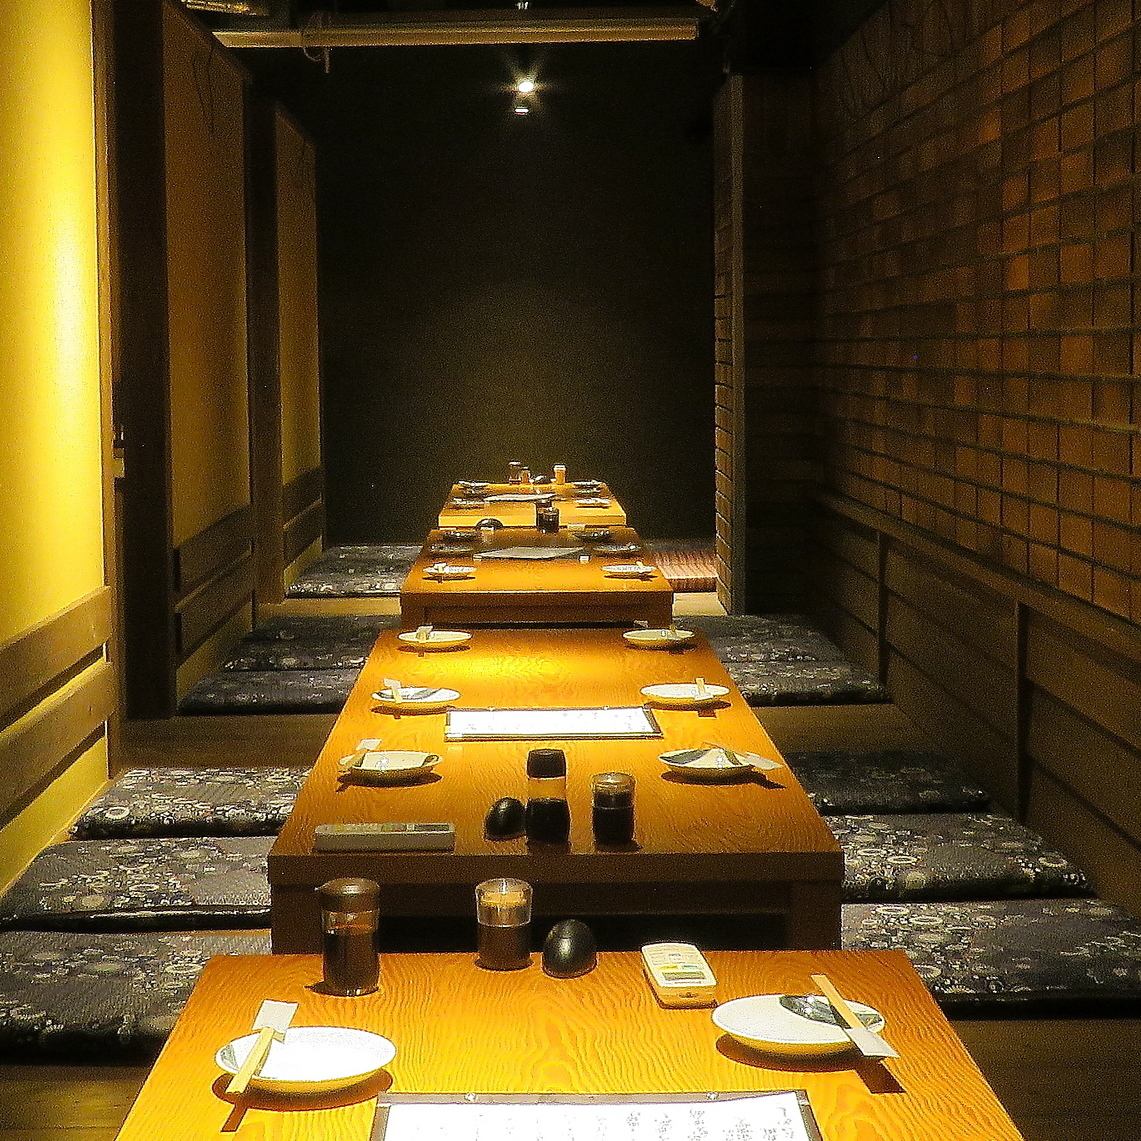 A horigotatsu-style private room for private or work situations ◎